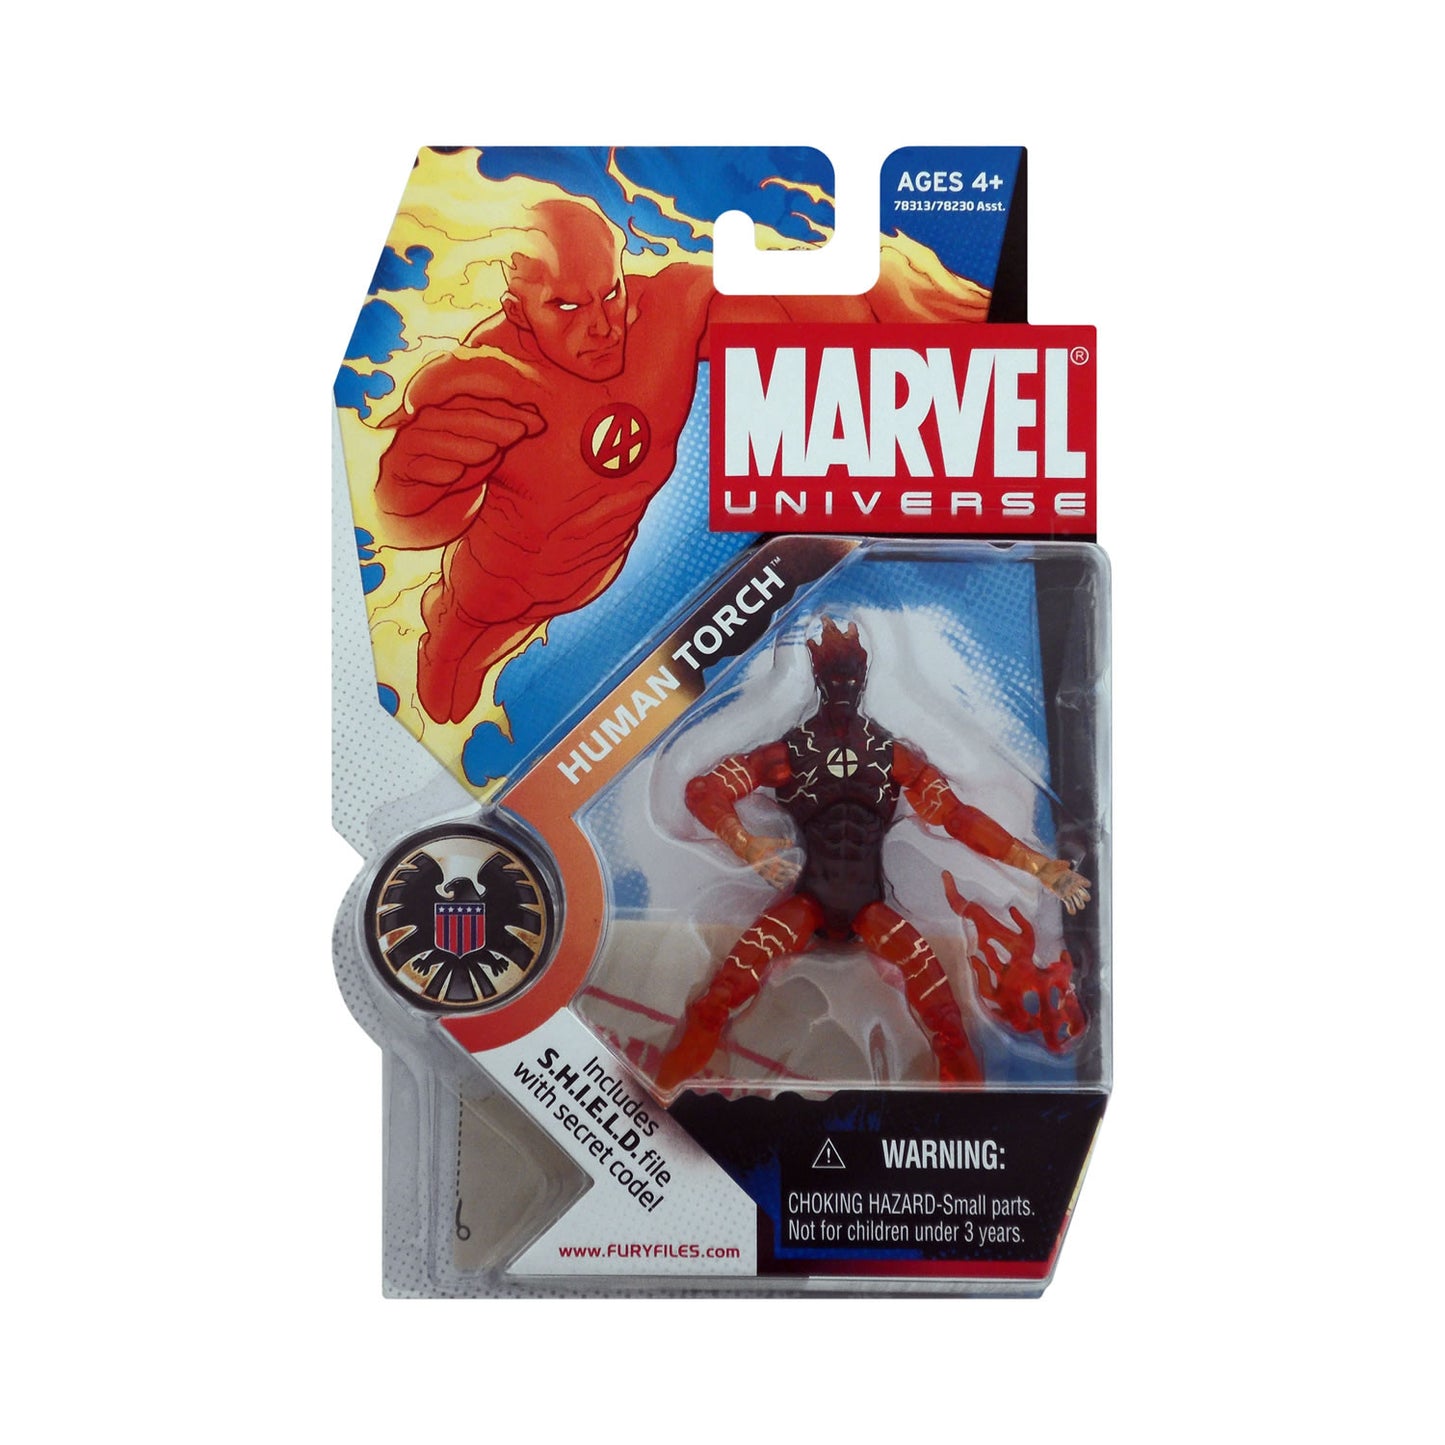 Marvel Universe Series 1 Figure 7 Human Torch (Flame On) 3.75-Inch Action Figure